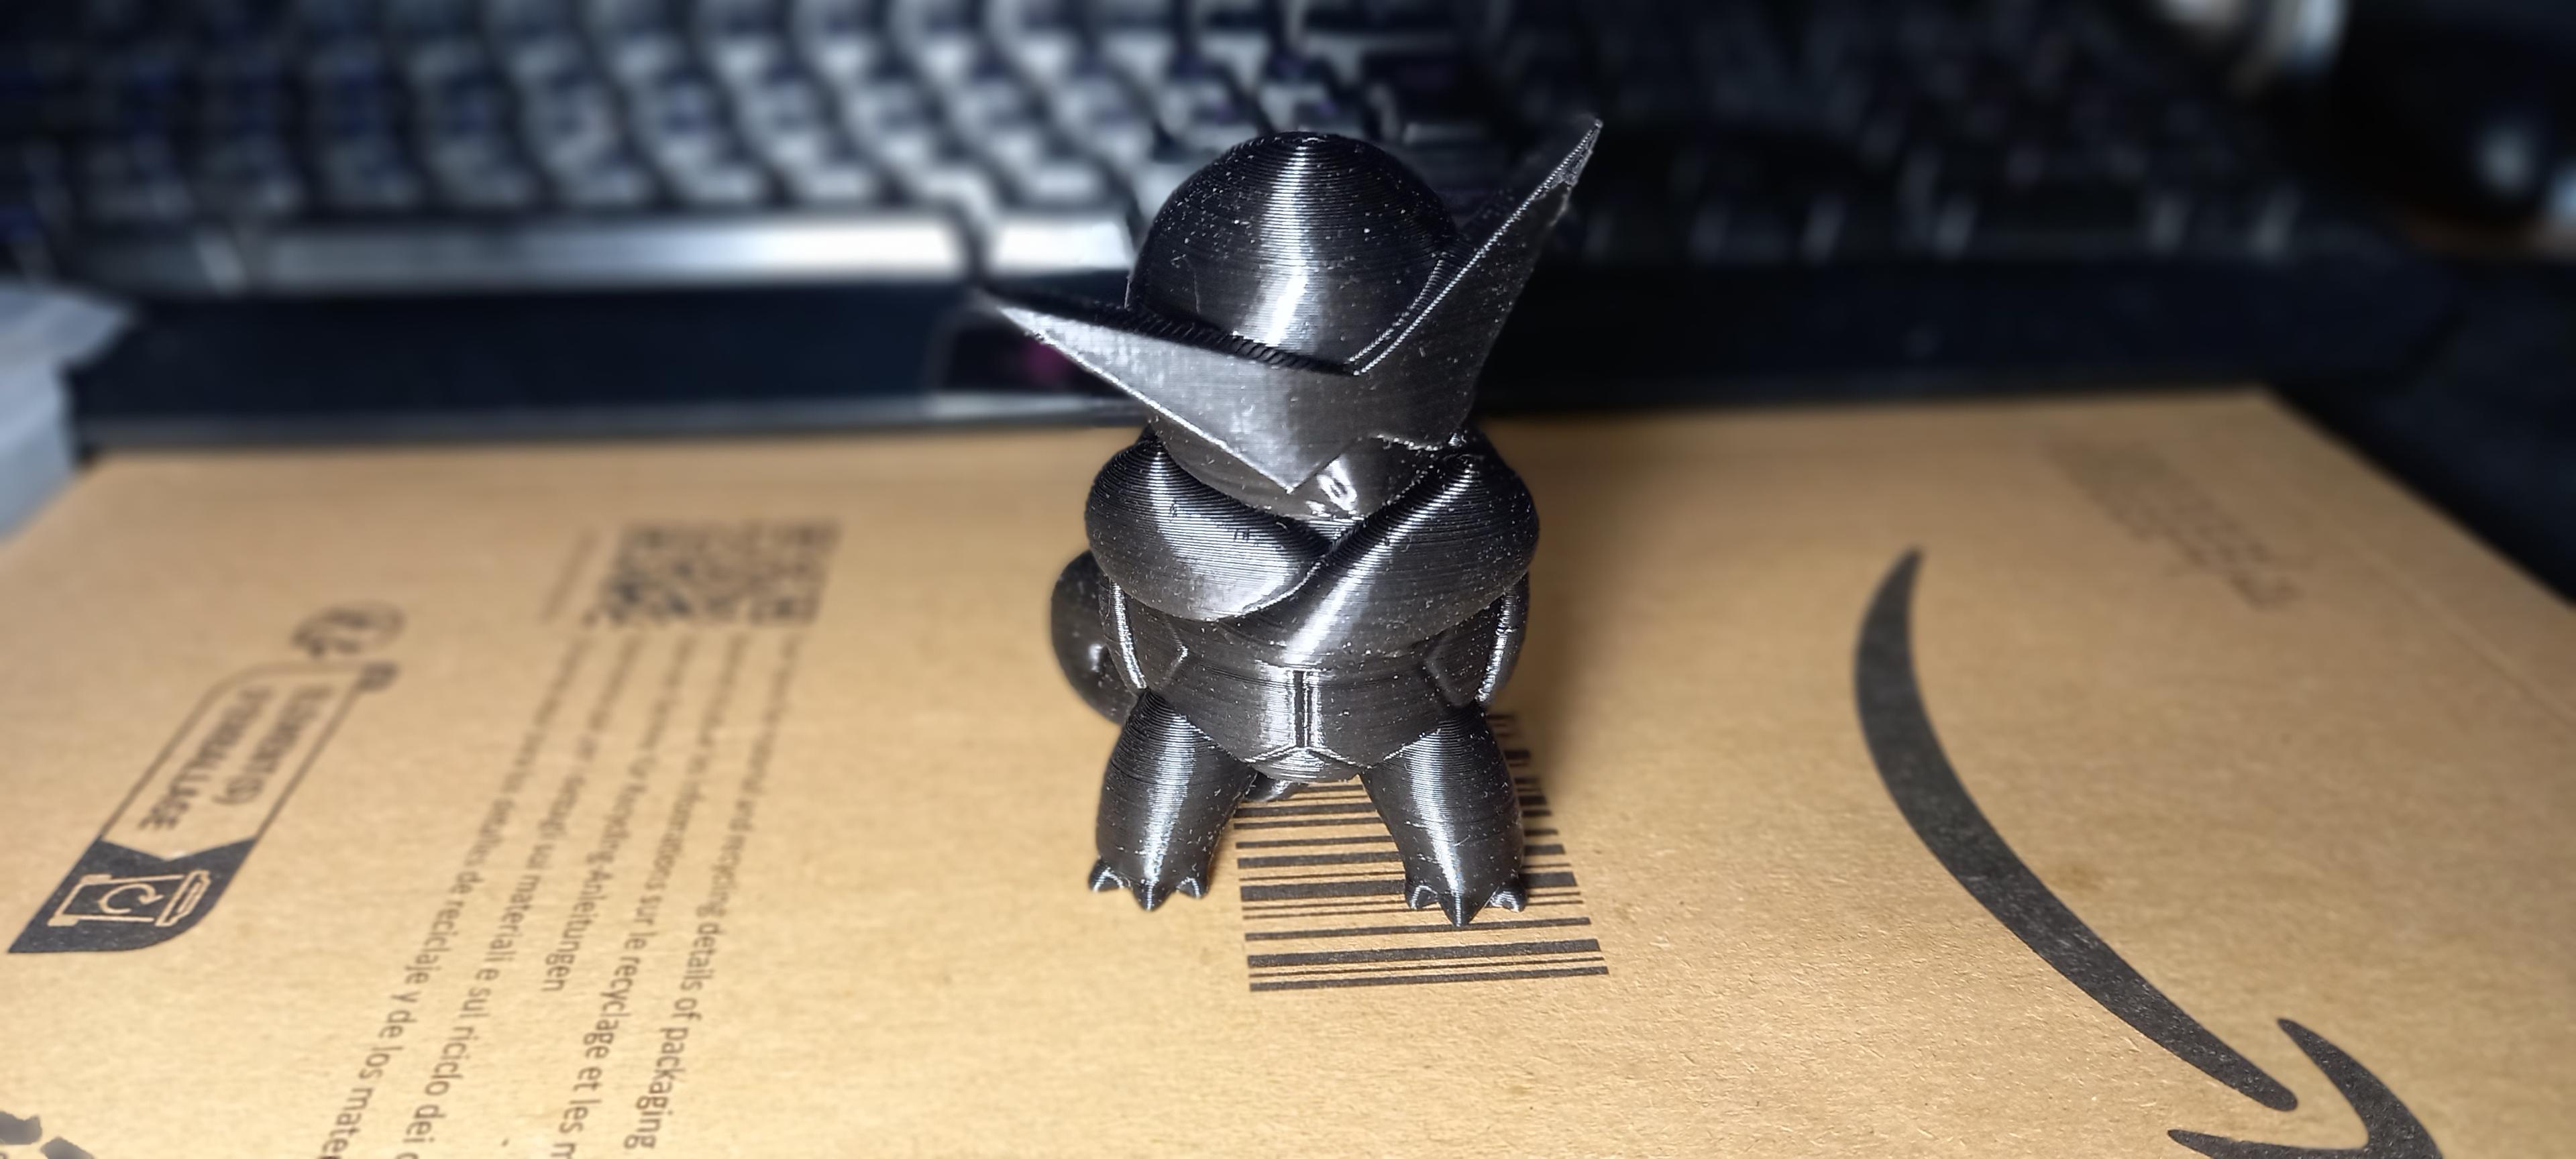 Squirtle with Shades - Pokemon - Fan Art - Lh: .2mm.
Some support hickups in first layer and under belly (had to print twice and probbably my own mistakes) otherwise awsome to print - 3d model